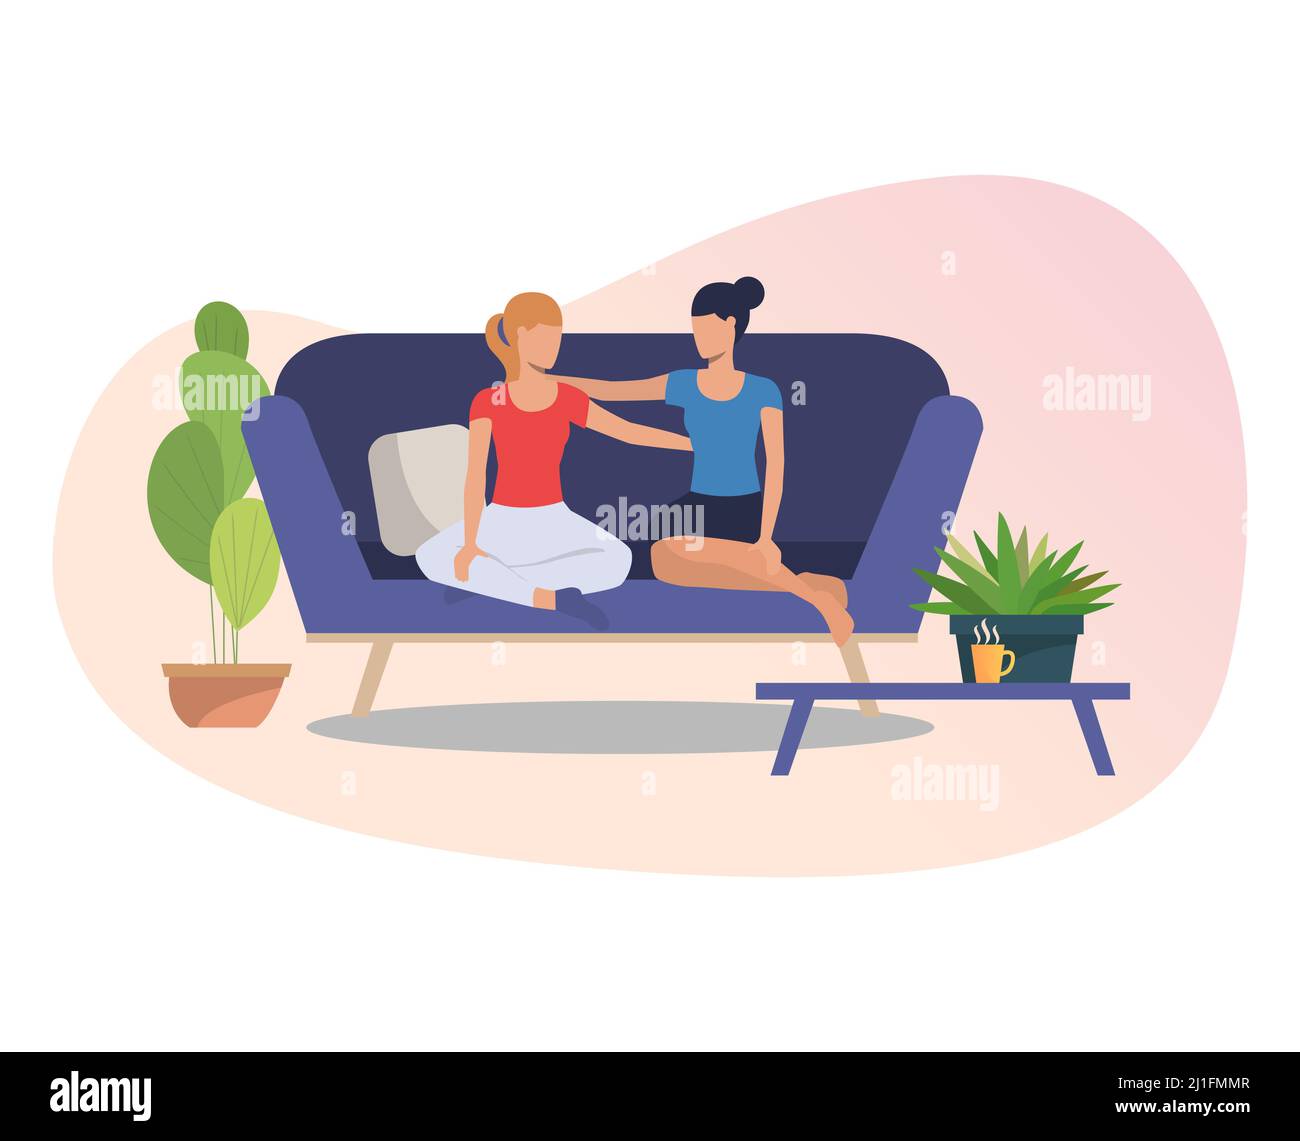 Female Friends Hugging Each Other Women Sitting On Couch Talking And Embracing Friendship 